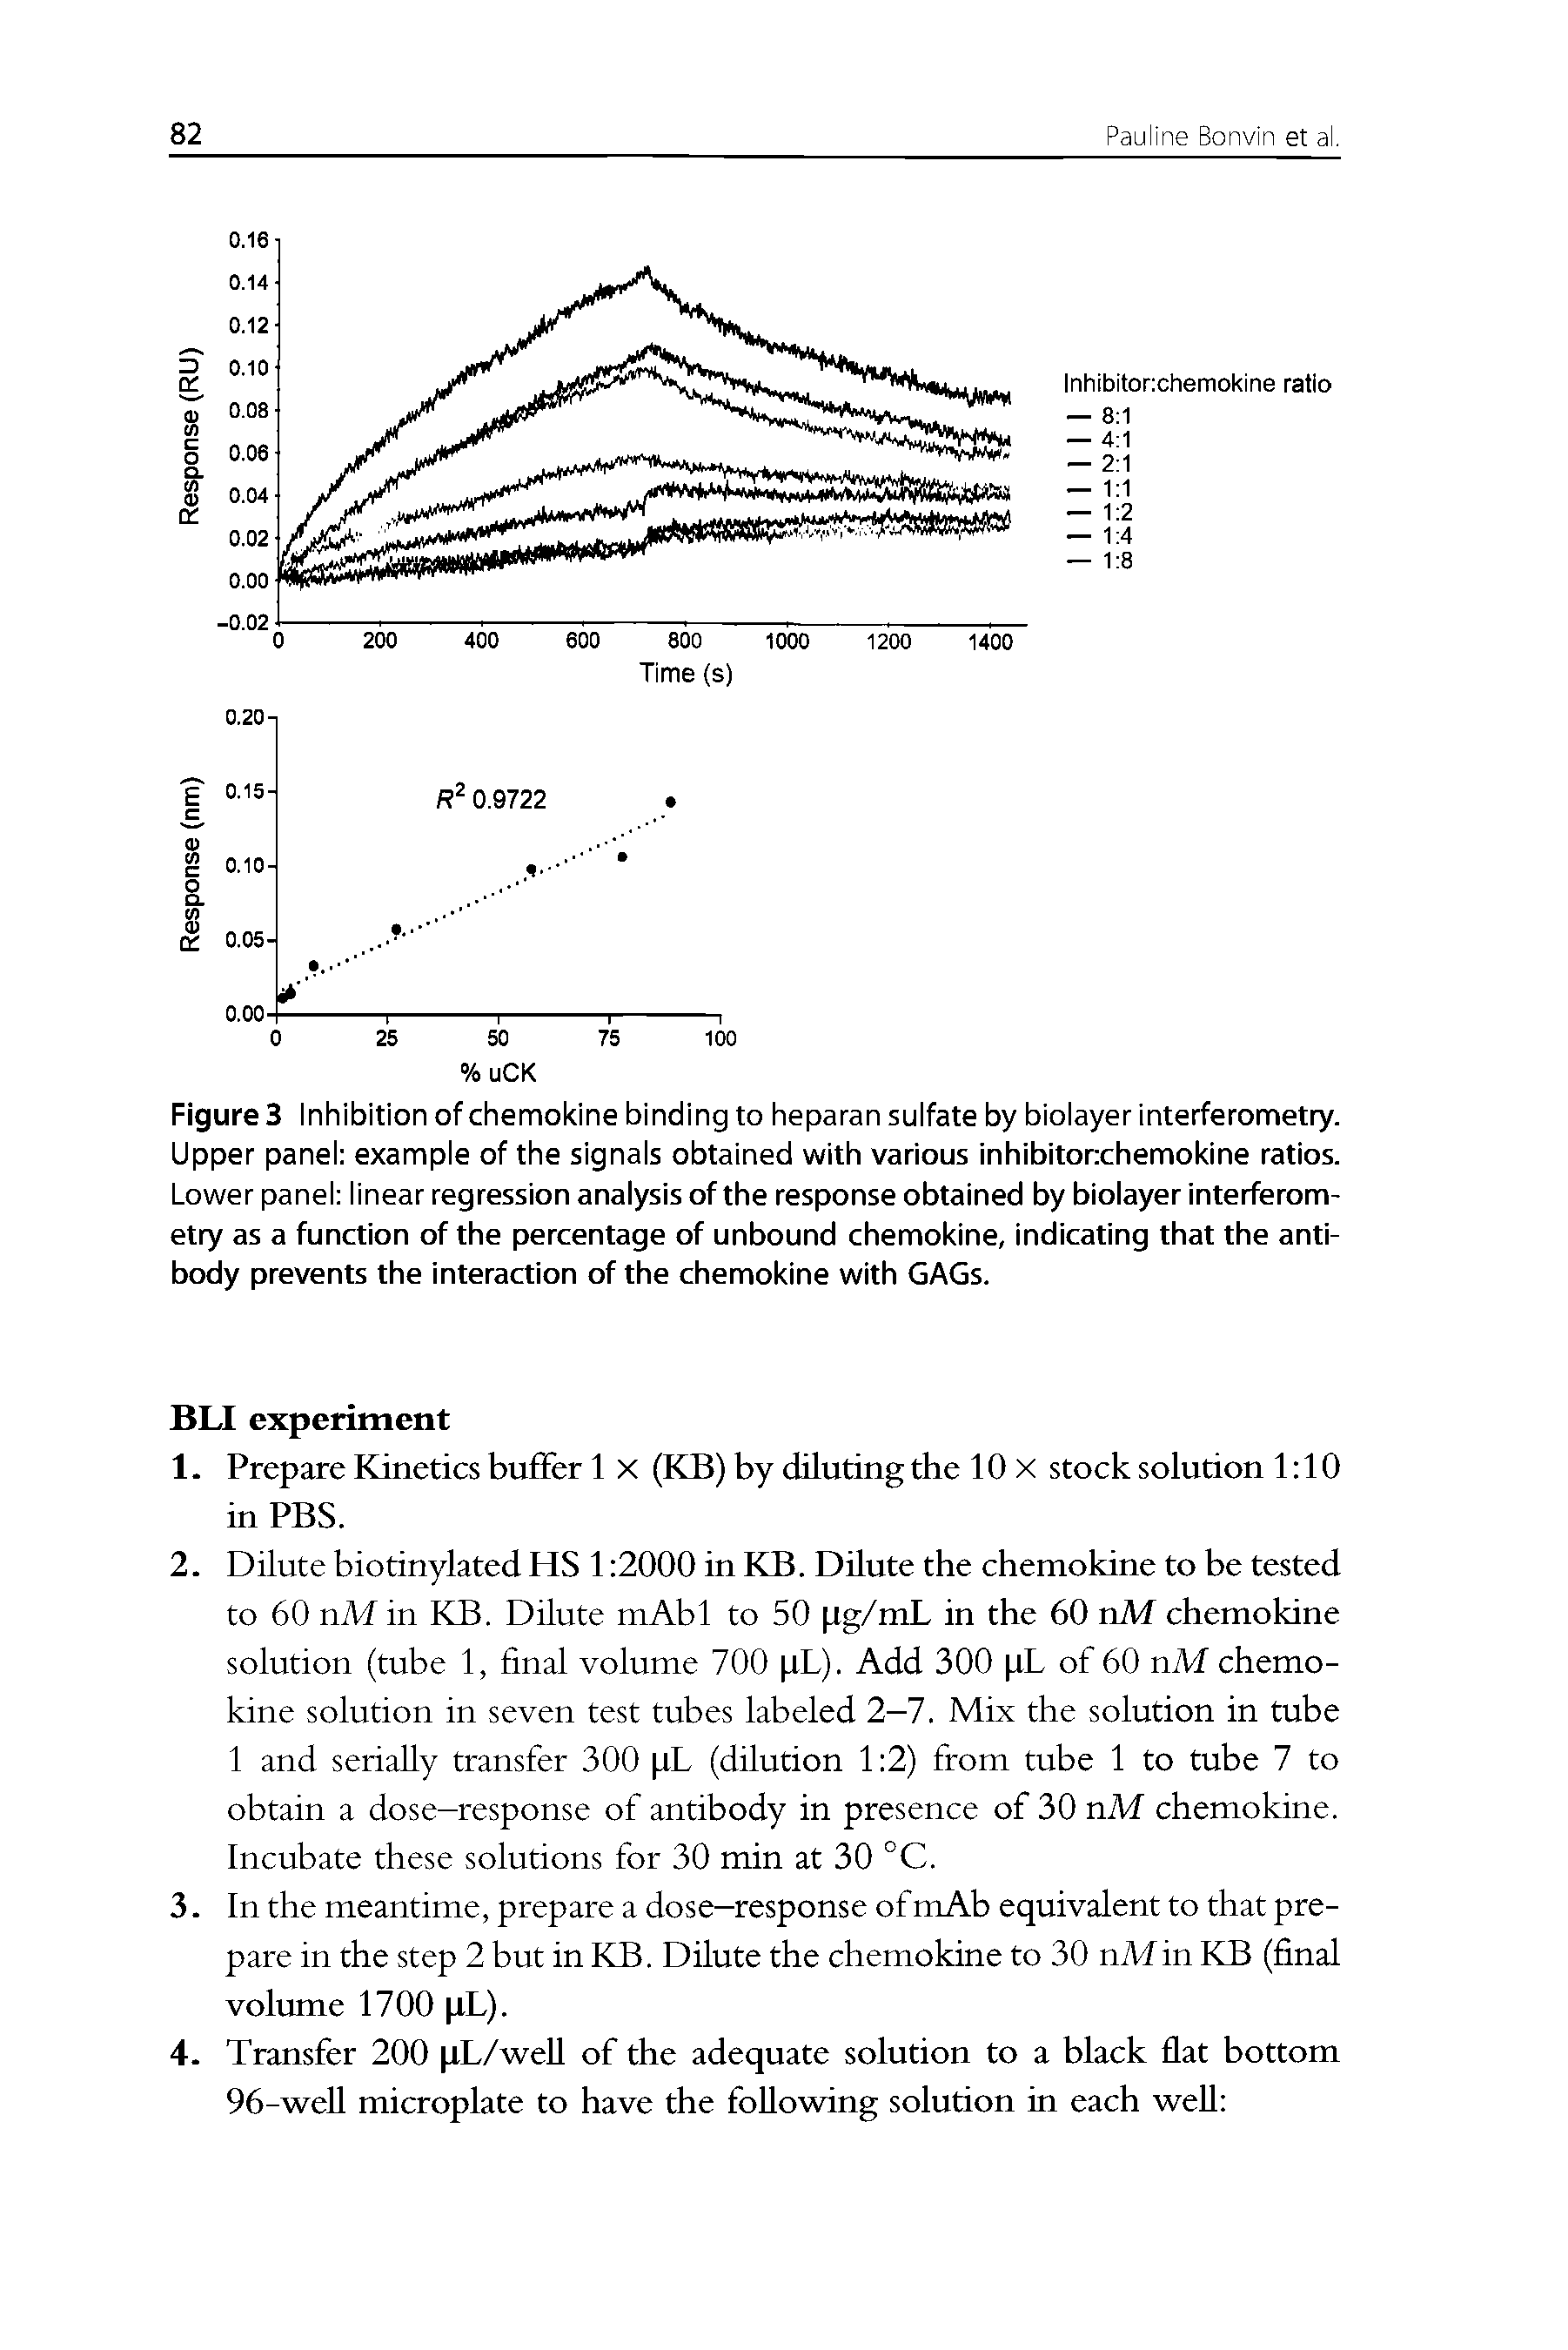 Figures Inhibition of chemokine binding to heparan sulfate by biolayer interferometry. Upper panel example of the signals obtained with various inhibitorrchemokine ratios. Lower panel linear regression analysis of the response obtained by biolayer interferometry as a function of the percentage of unbound chemokine, indicating that the antibody prevents the interaction of the chemokine with GAGs.